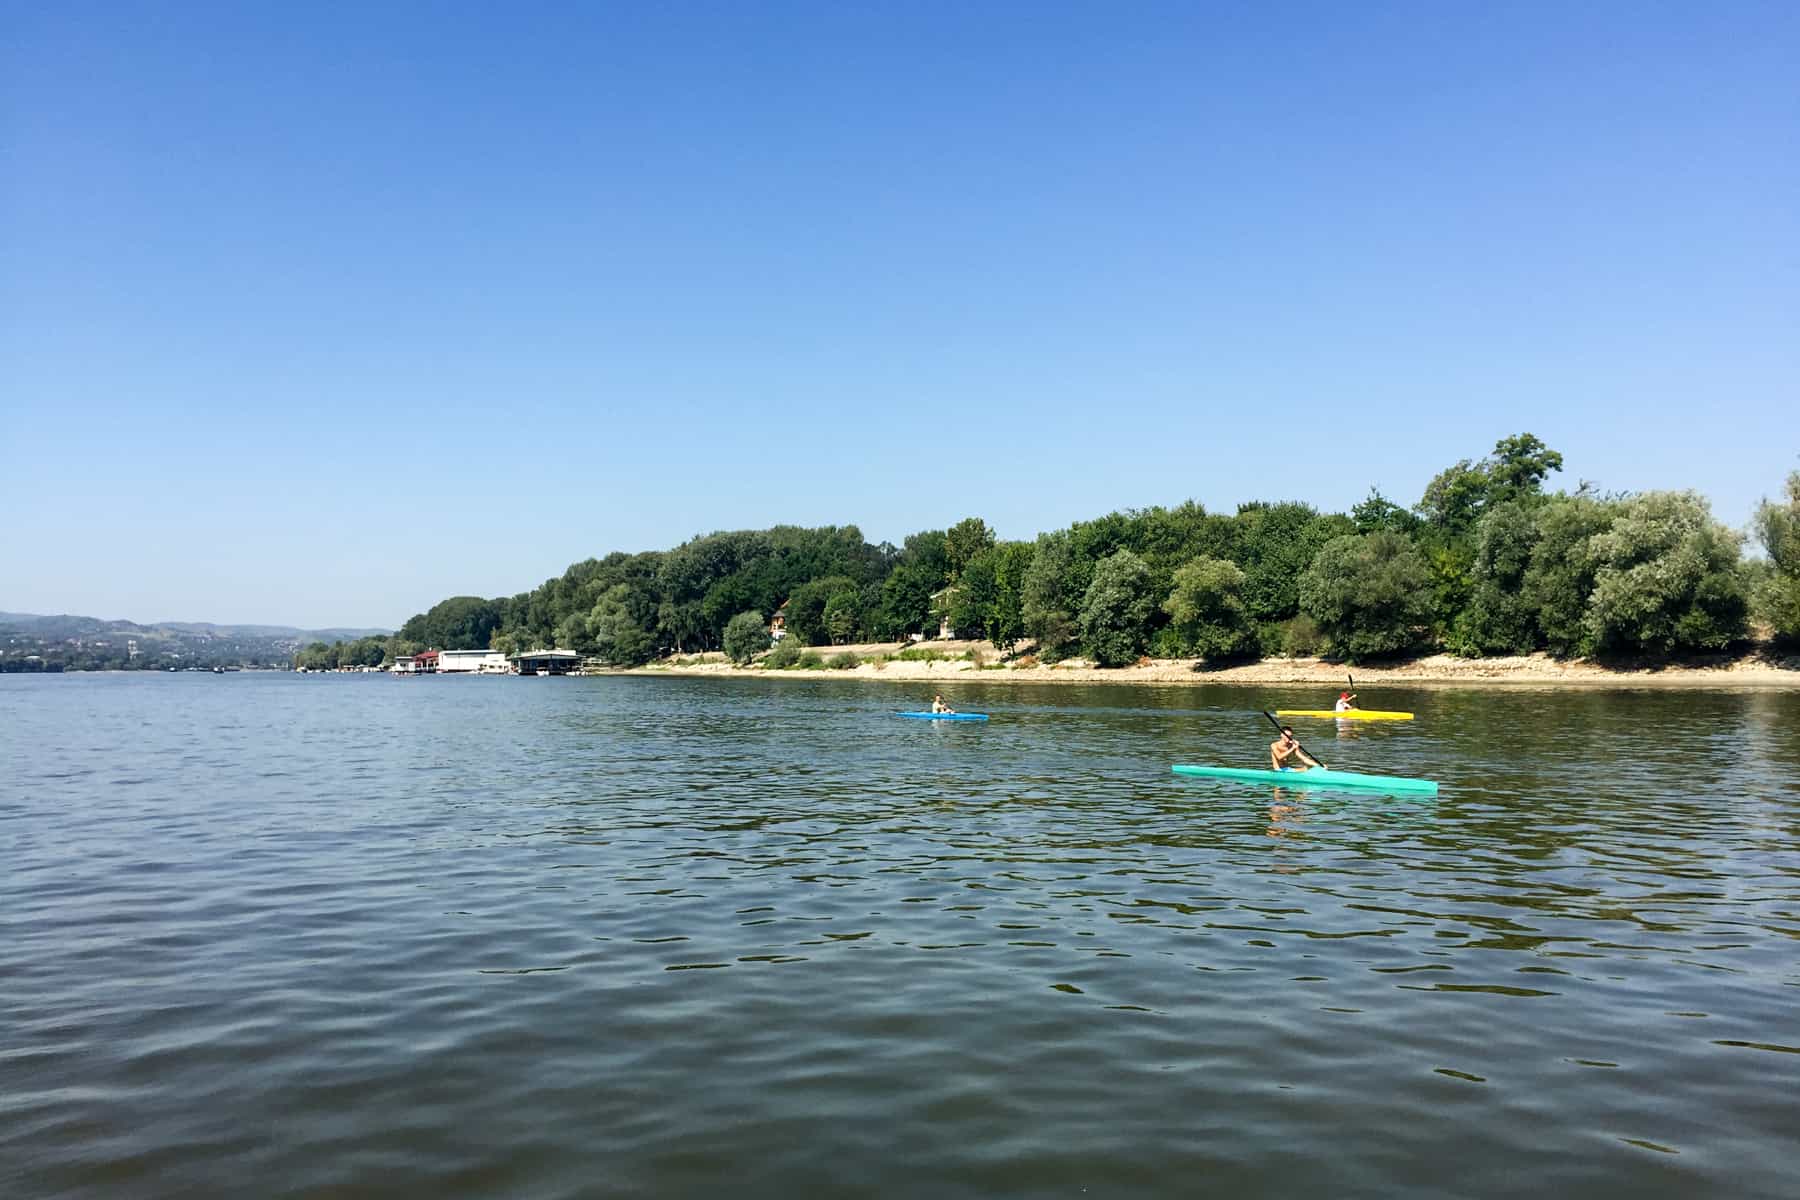 Three people in blue, mint green and yellow kayaks gloat past a yellow sand, tree-filled island on the Danube River in Serbia.